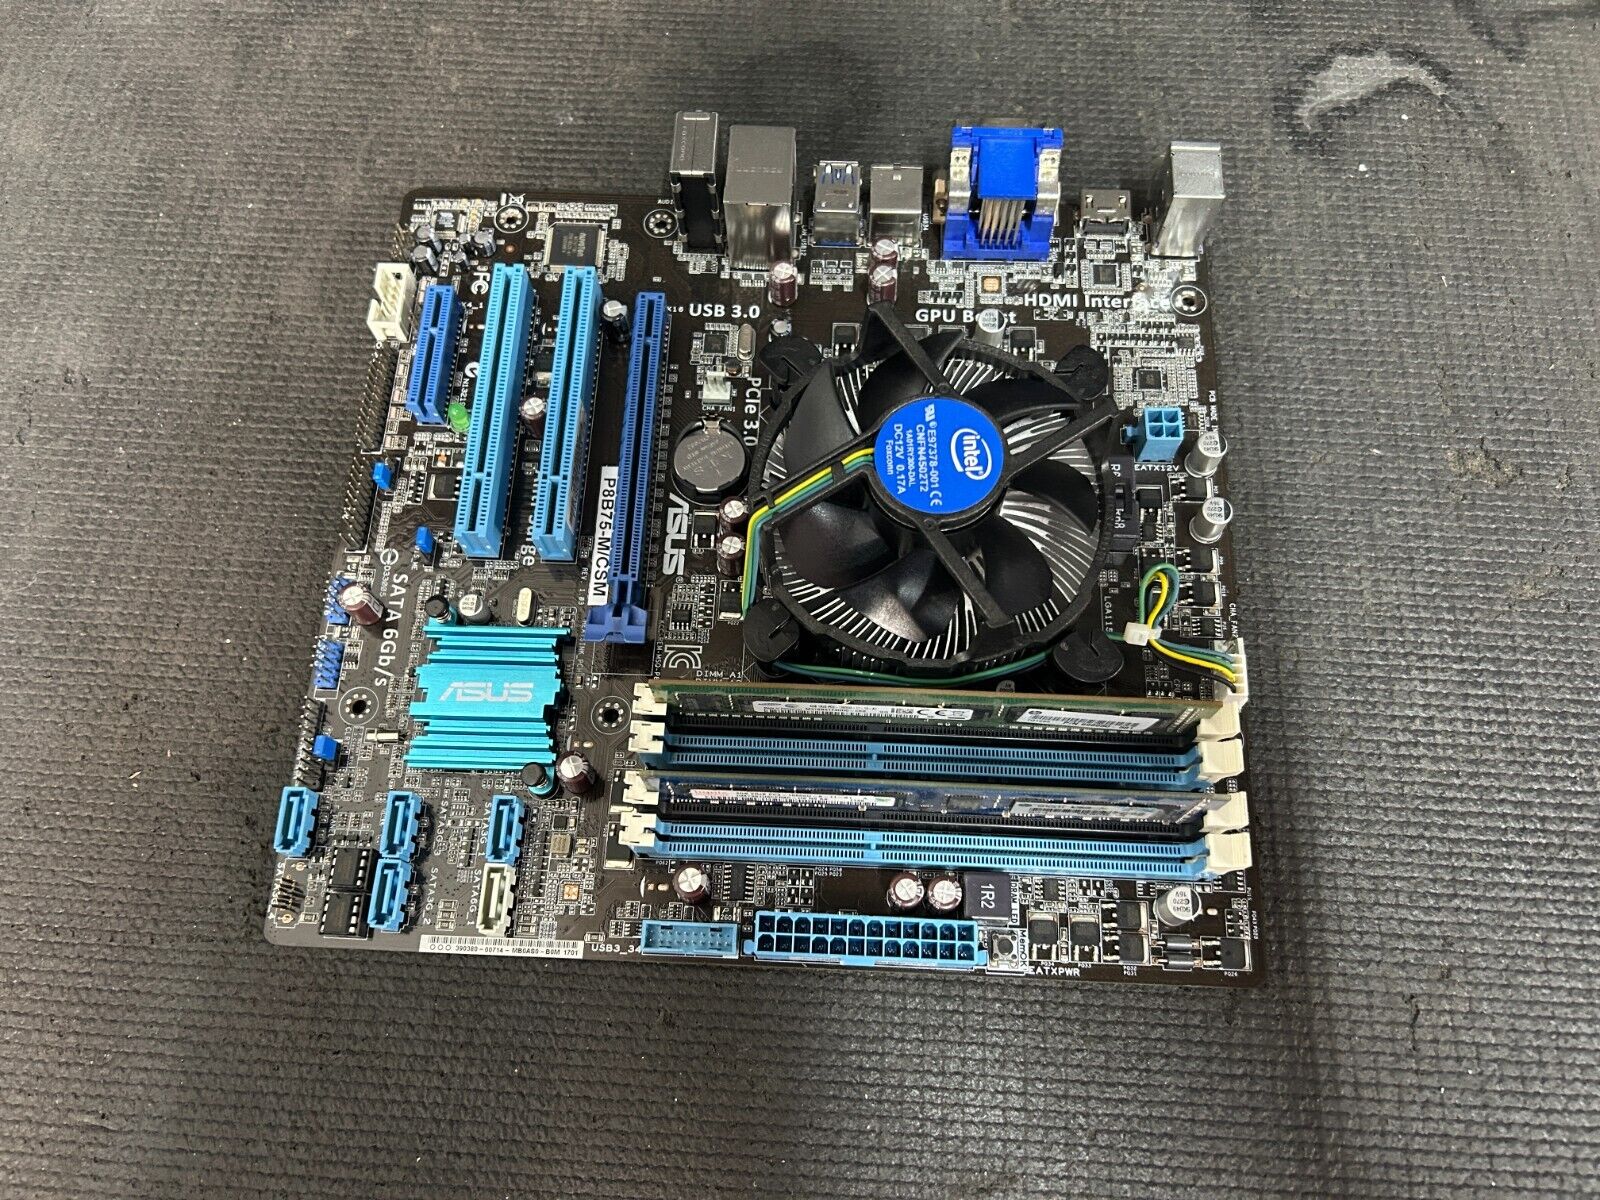 ASUS P8B75-M/CSM, LGA 1155 with Intel I7-3770K 3.50GHz 8GB RAM Heatsink and Fan